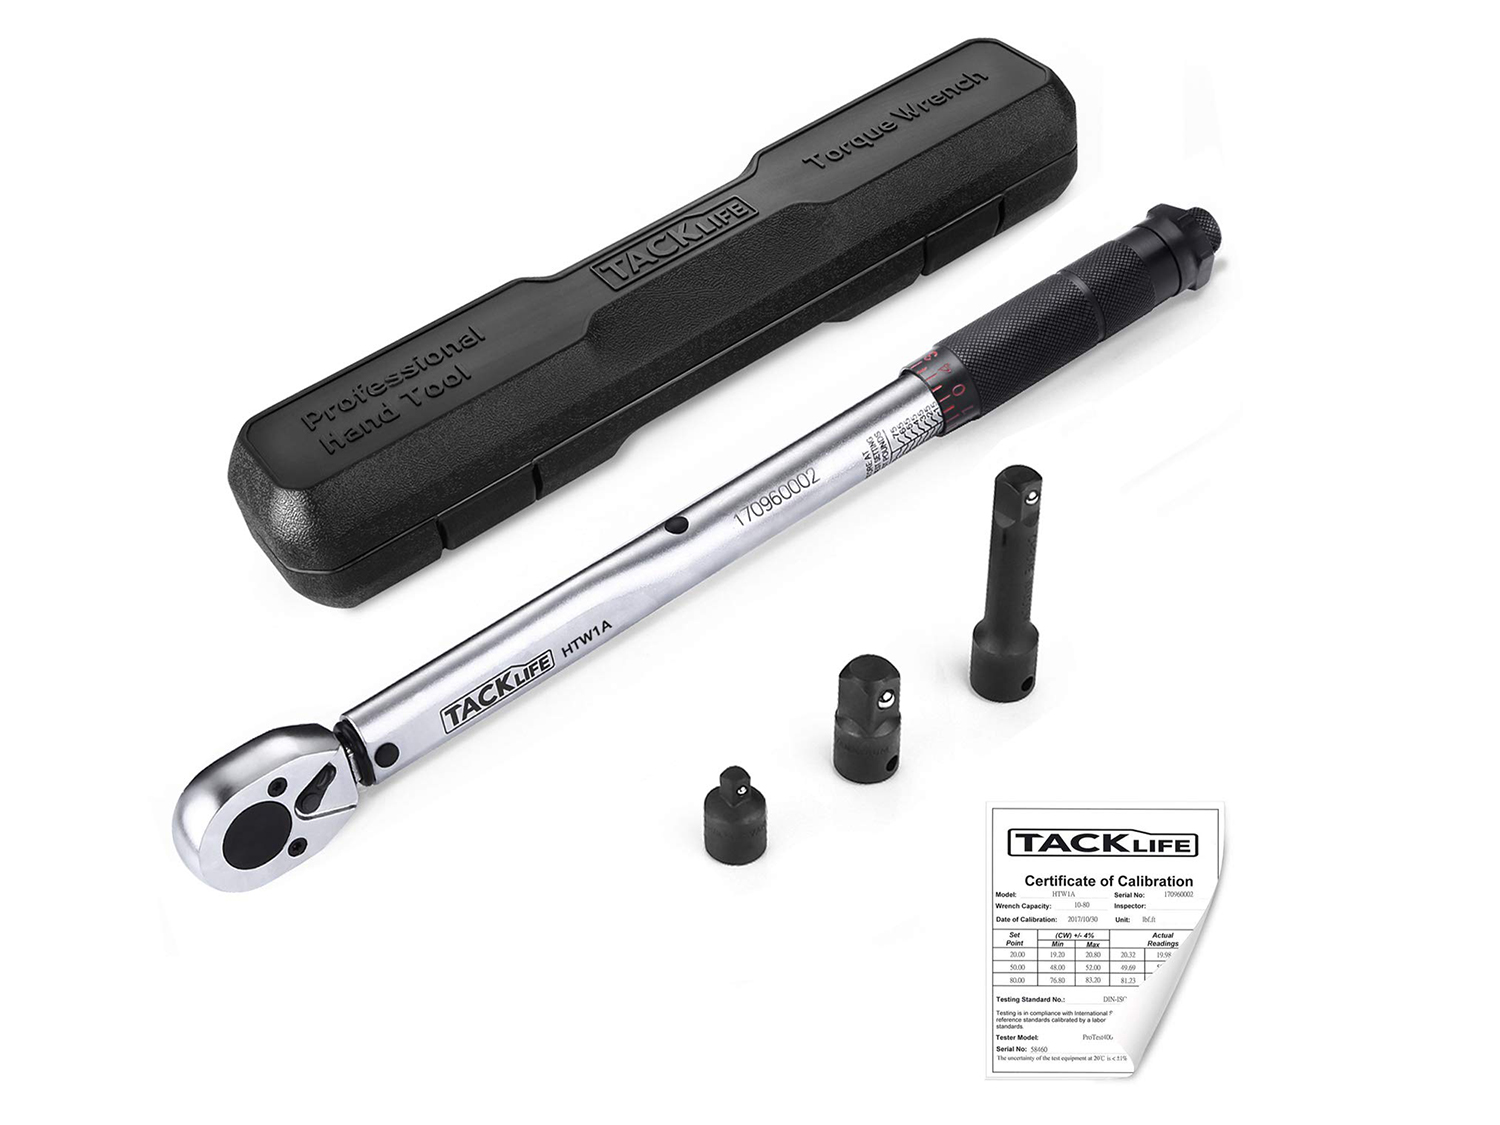 Color : 1 2 Without Socket Wrench Mechanic Tool Set Torque Wrench Bike 1/4 3/8 1/2 Square Drive 5-210N.m Two-Way Precise Ratchet Wrench Repair Spanner Key Hand Tools